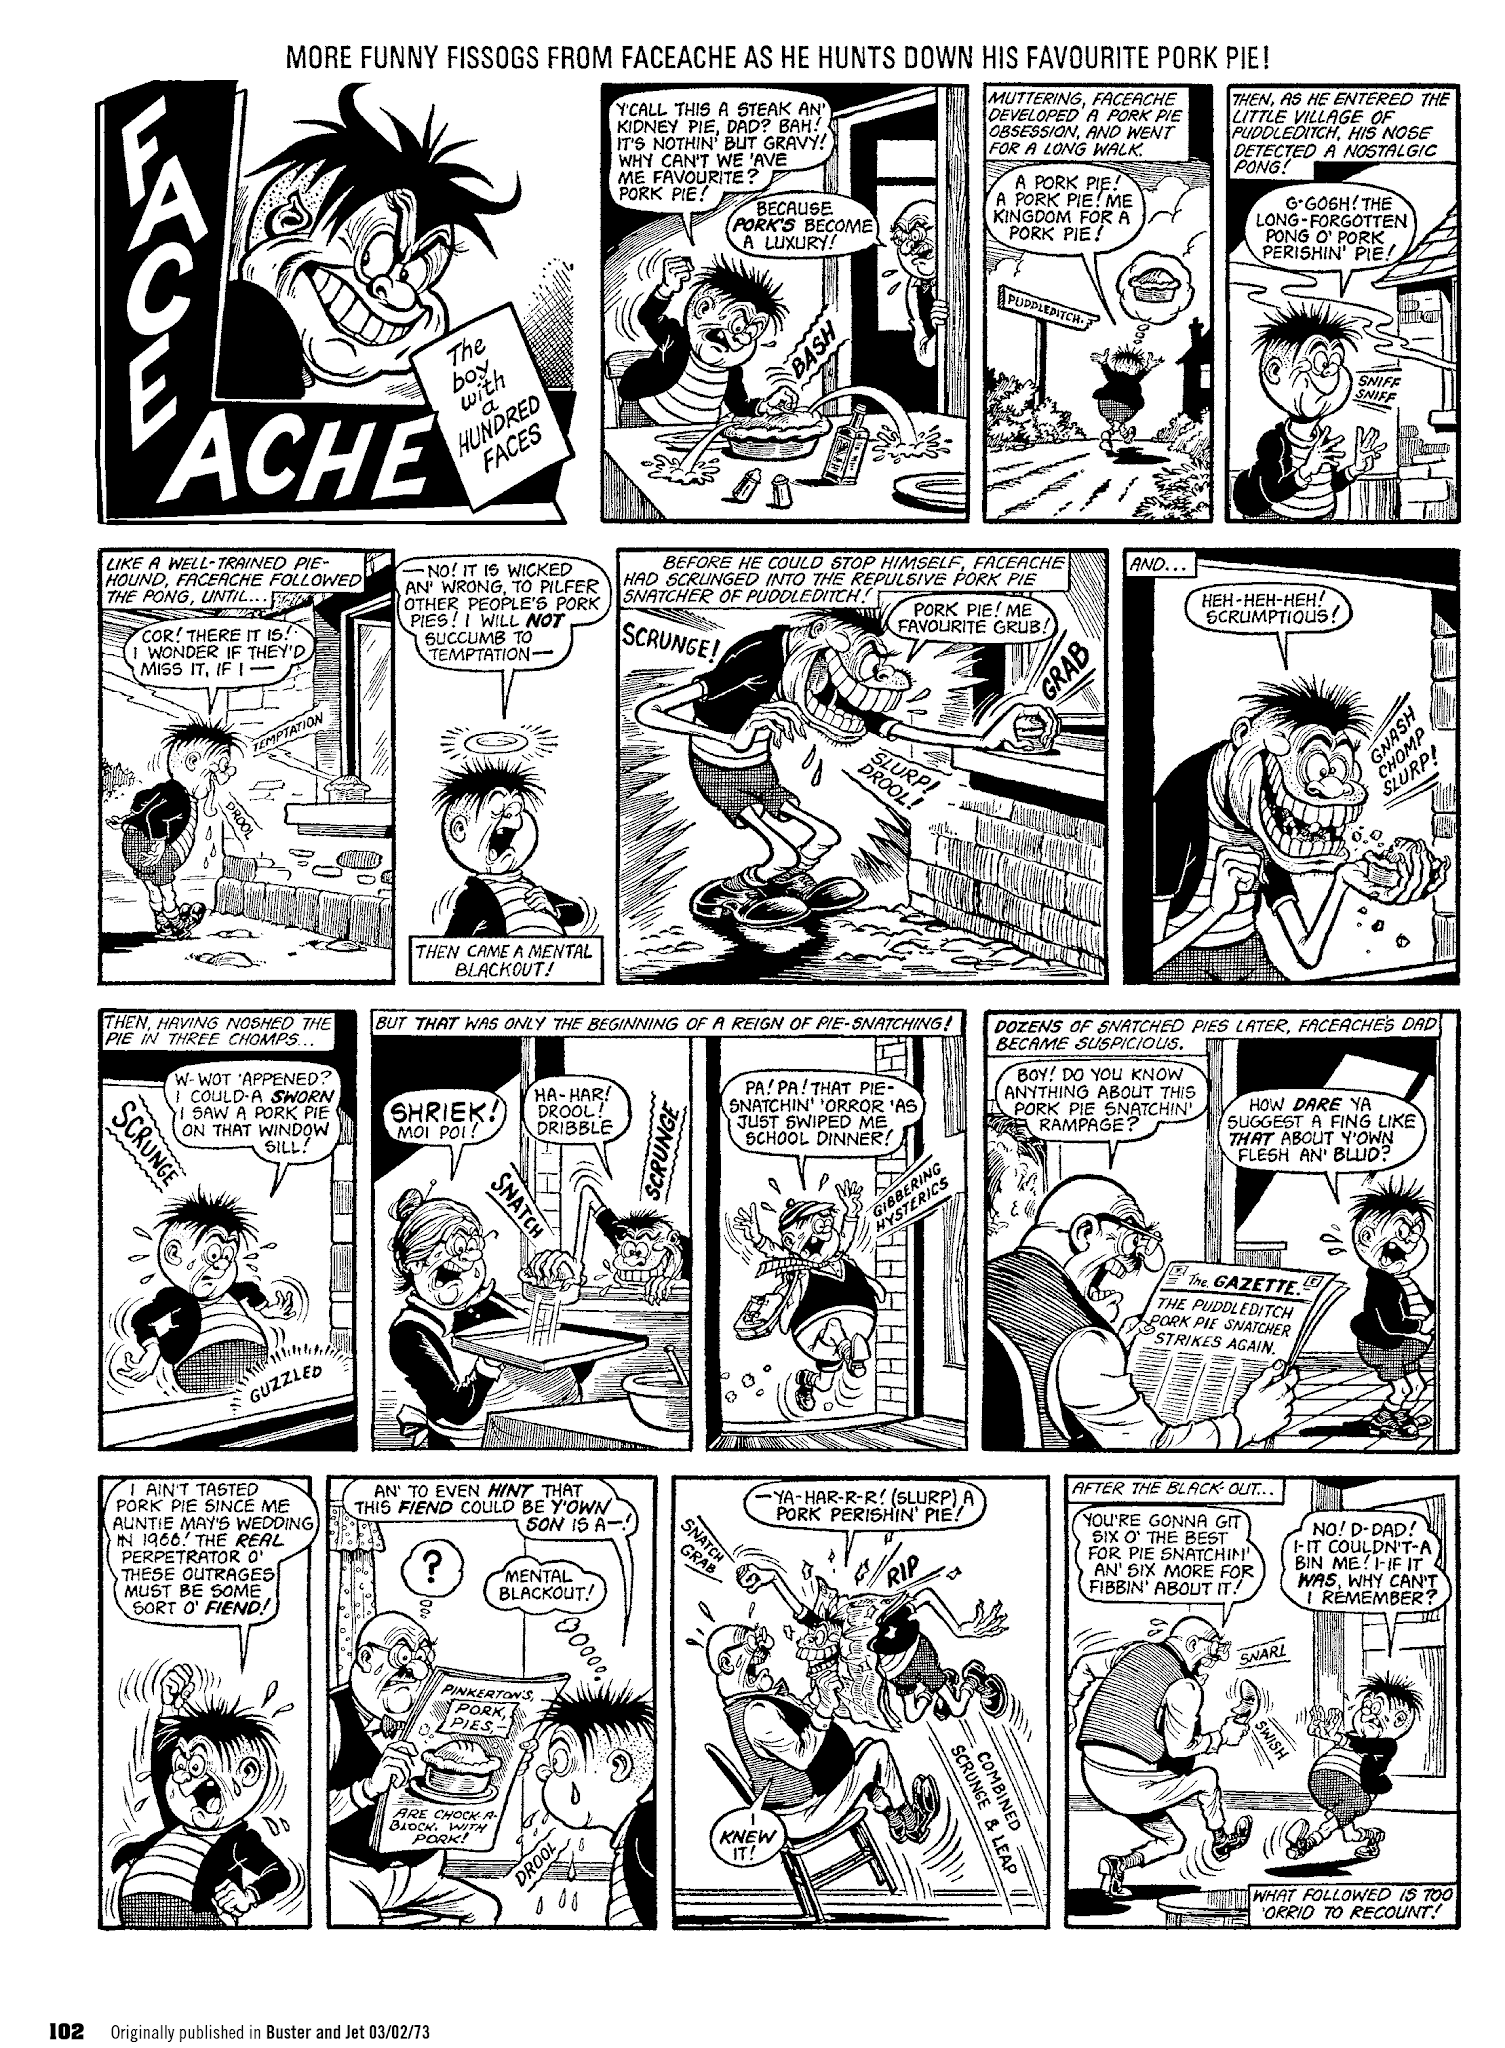 Read online Faceache: The First Hundred Scrunges comic -  Issue # TPB 1 - 104